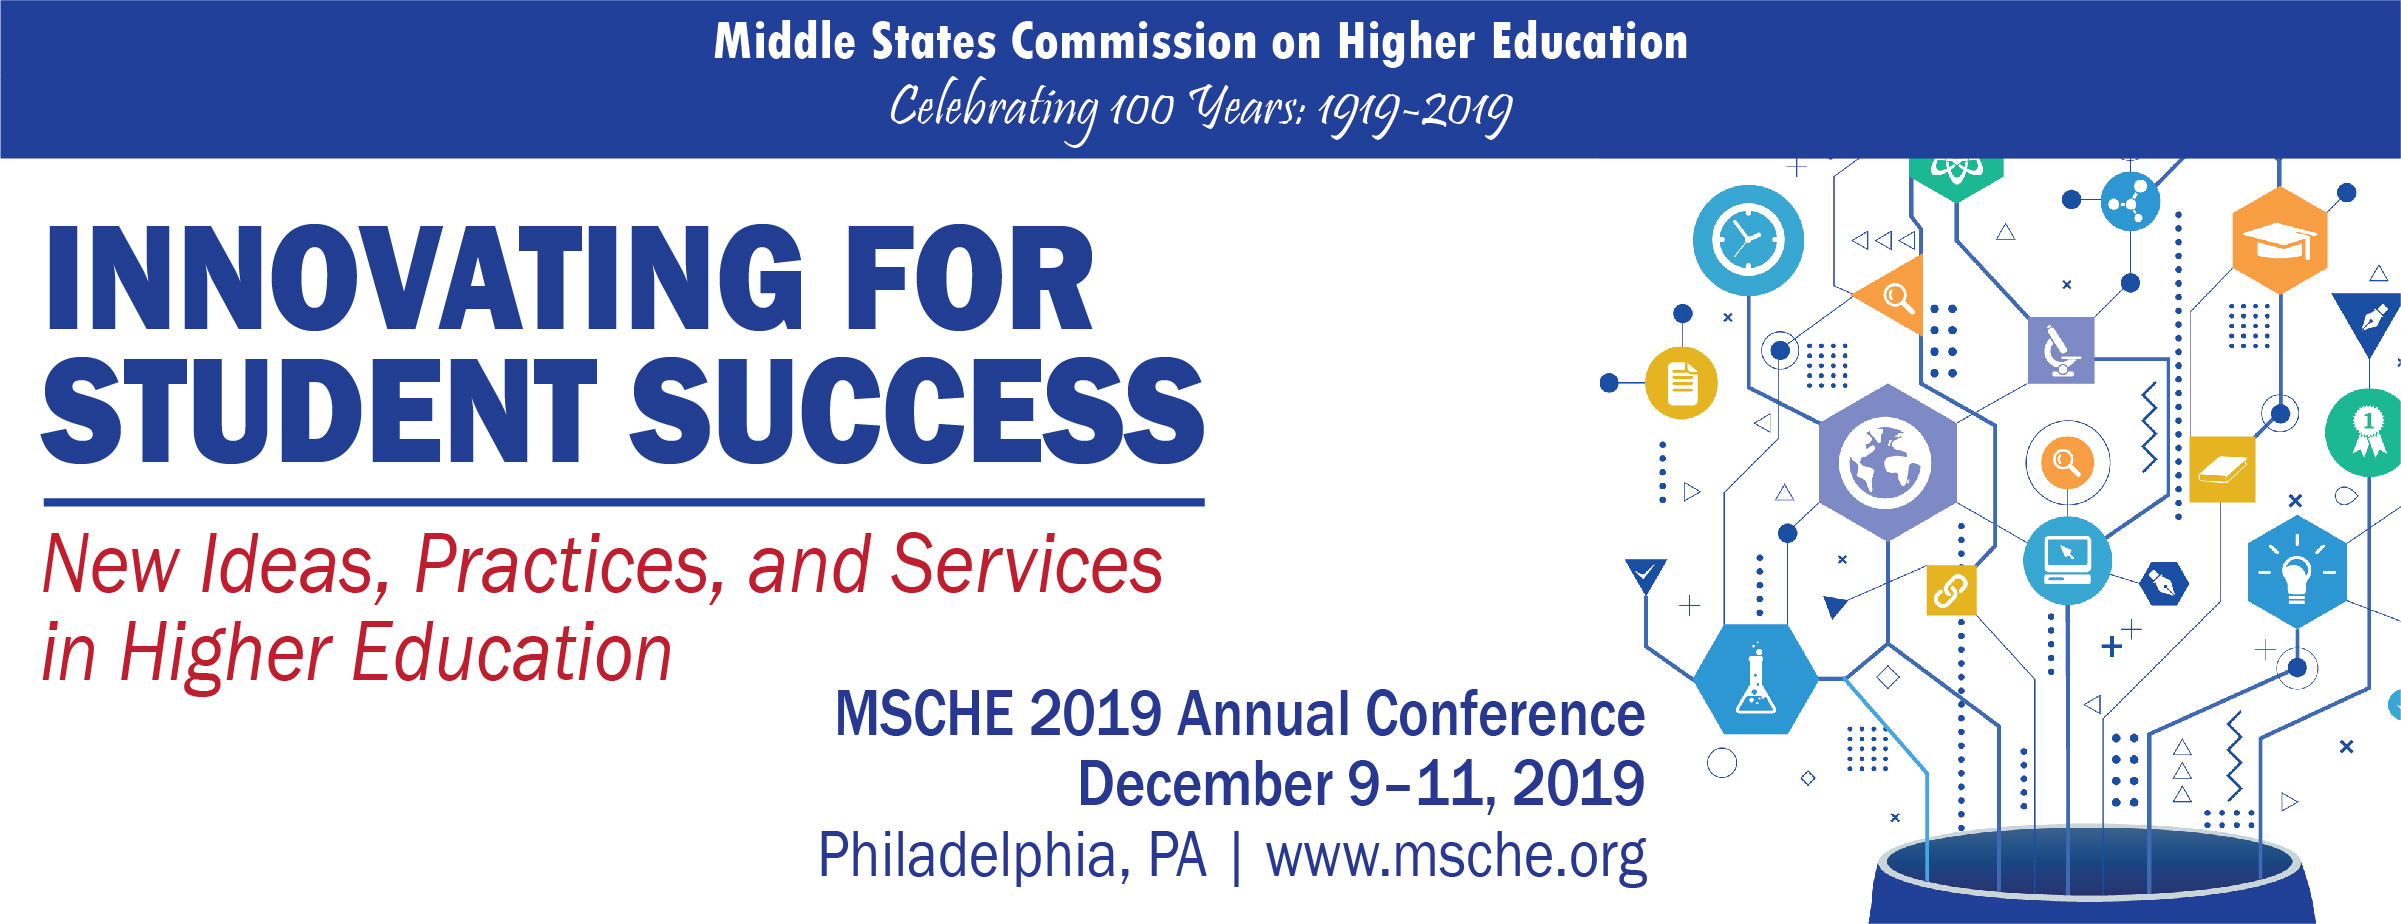 middle states commission on higher education